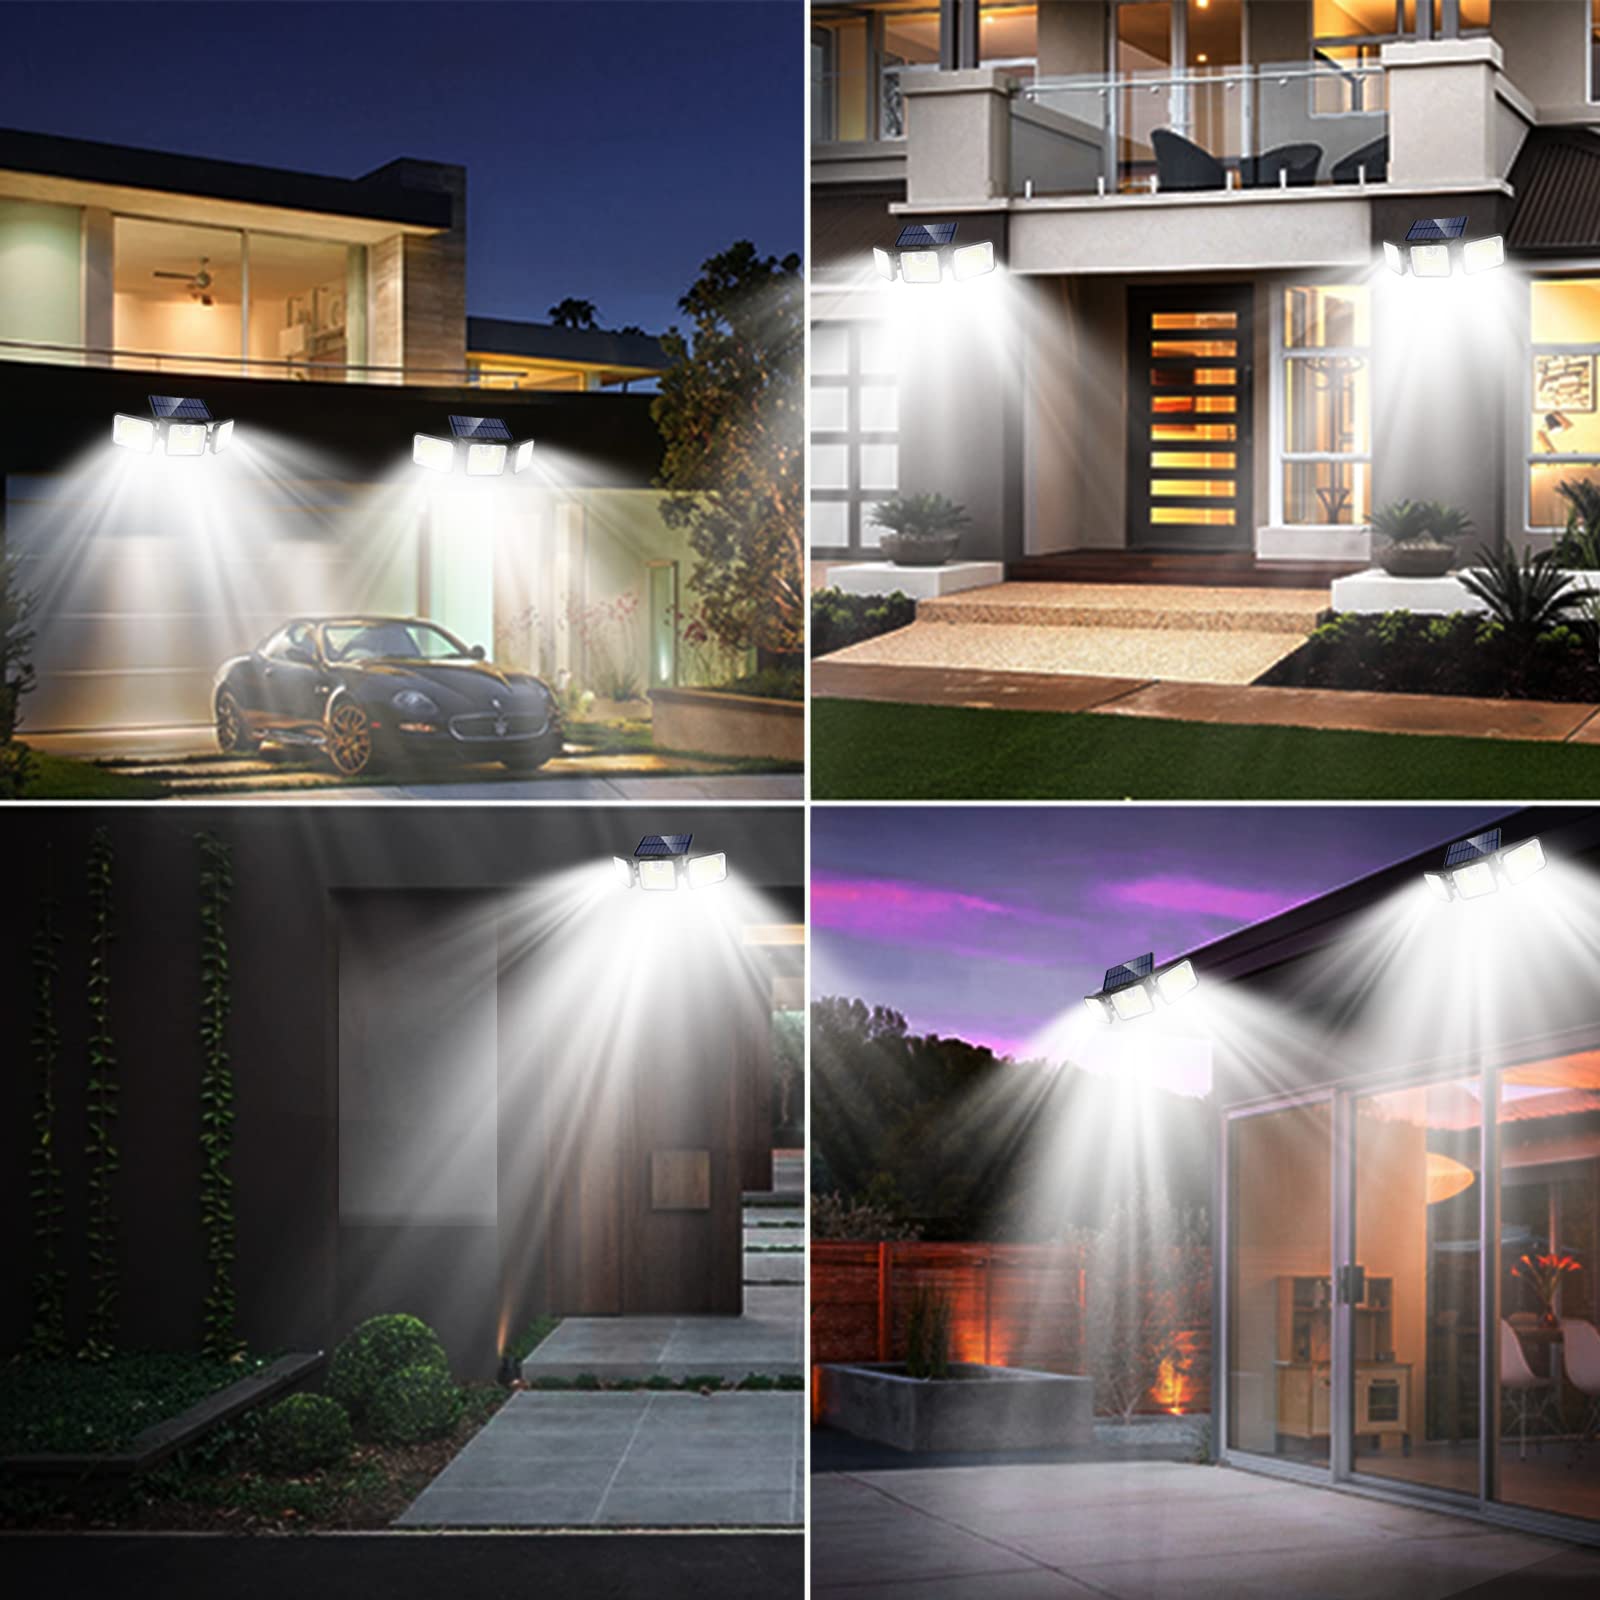 Aigleya Solar Outdoor Lights, 3000LM180 LED Motion Sensor Outdoor Lights 3 Heads Solar Security Lights IP65 Solar Flood Lights,270° Wide Angle Luces Solares para Exteriores with 3 Modes(2 Packs)